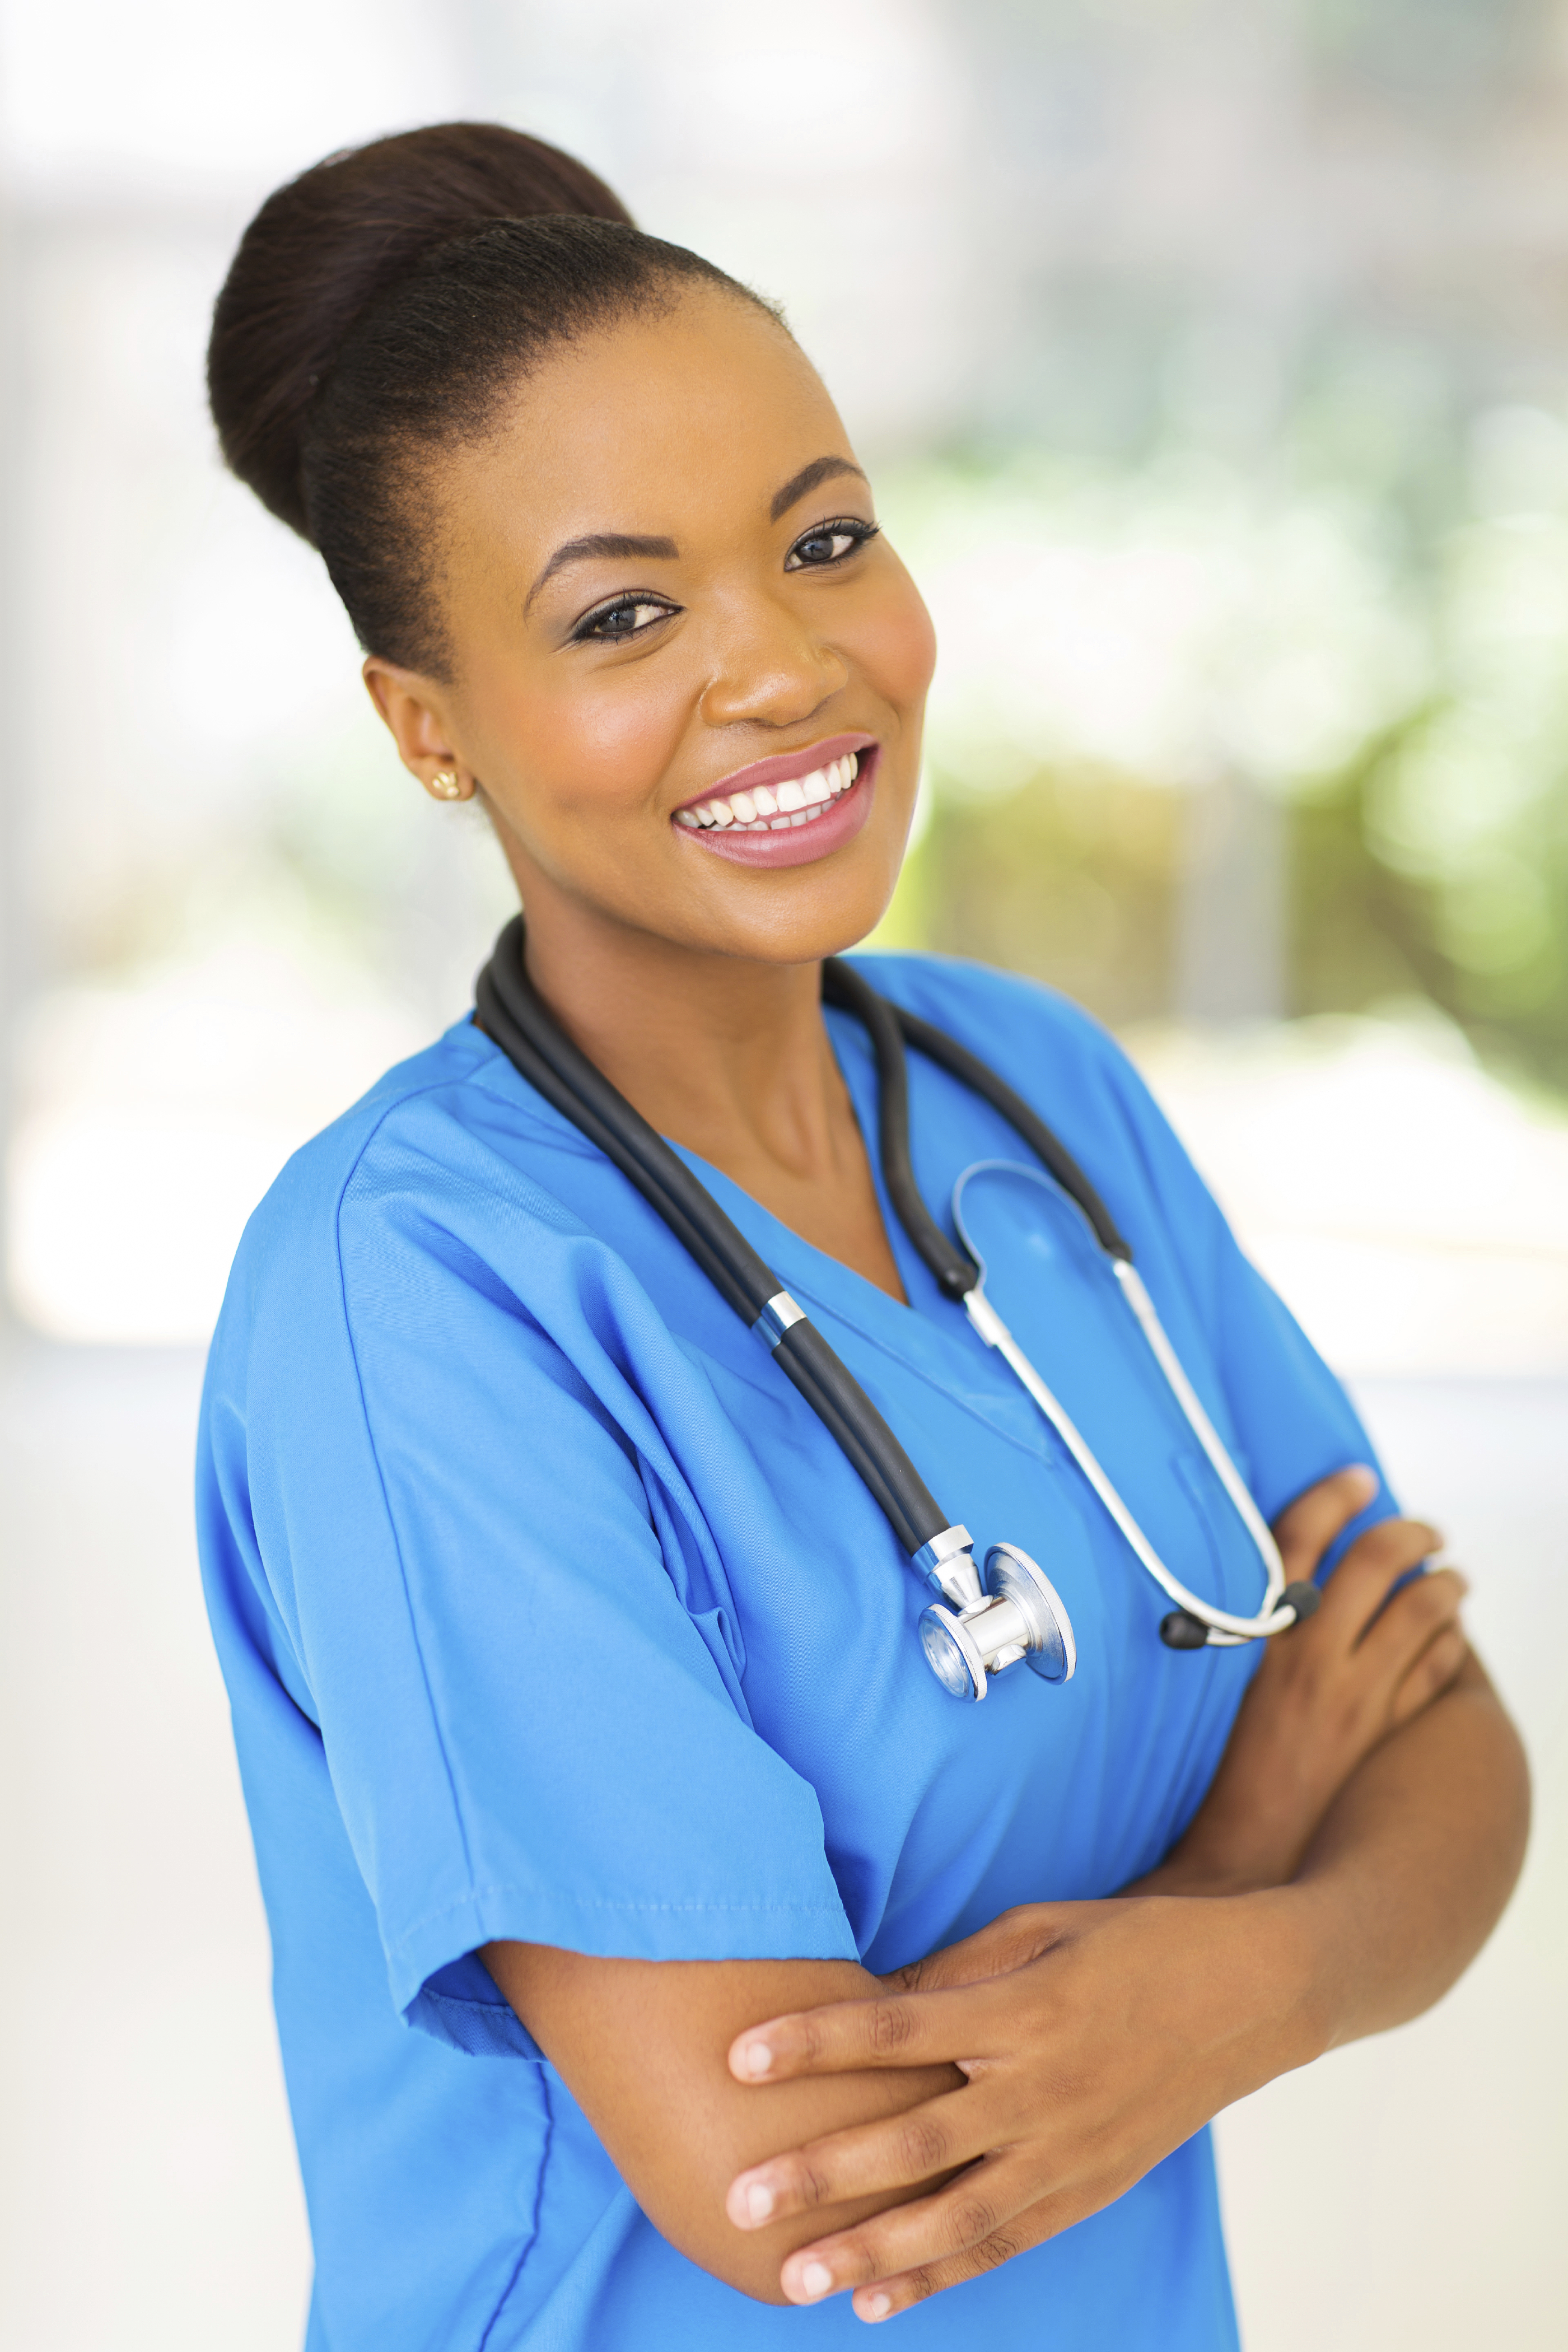 Get Great Pay And Benefits With Millenia Medical Staffing 888-686-6877 Indiana Travel Nursing Jobs